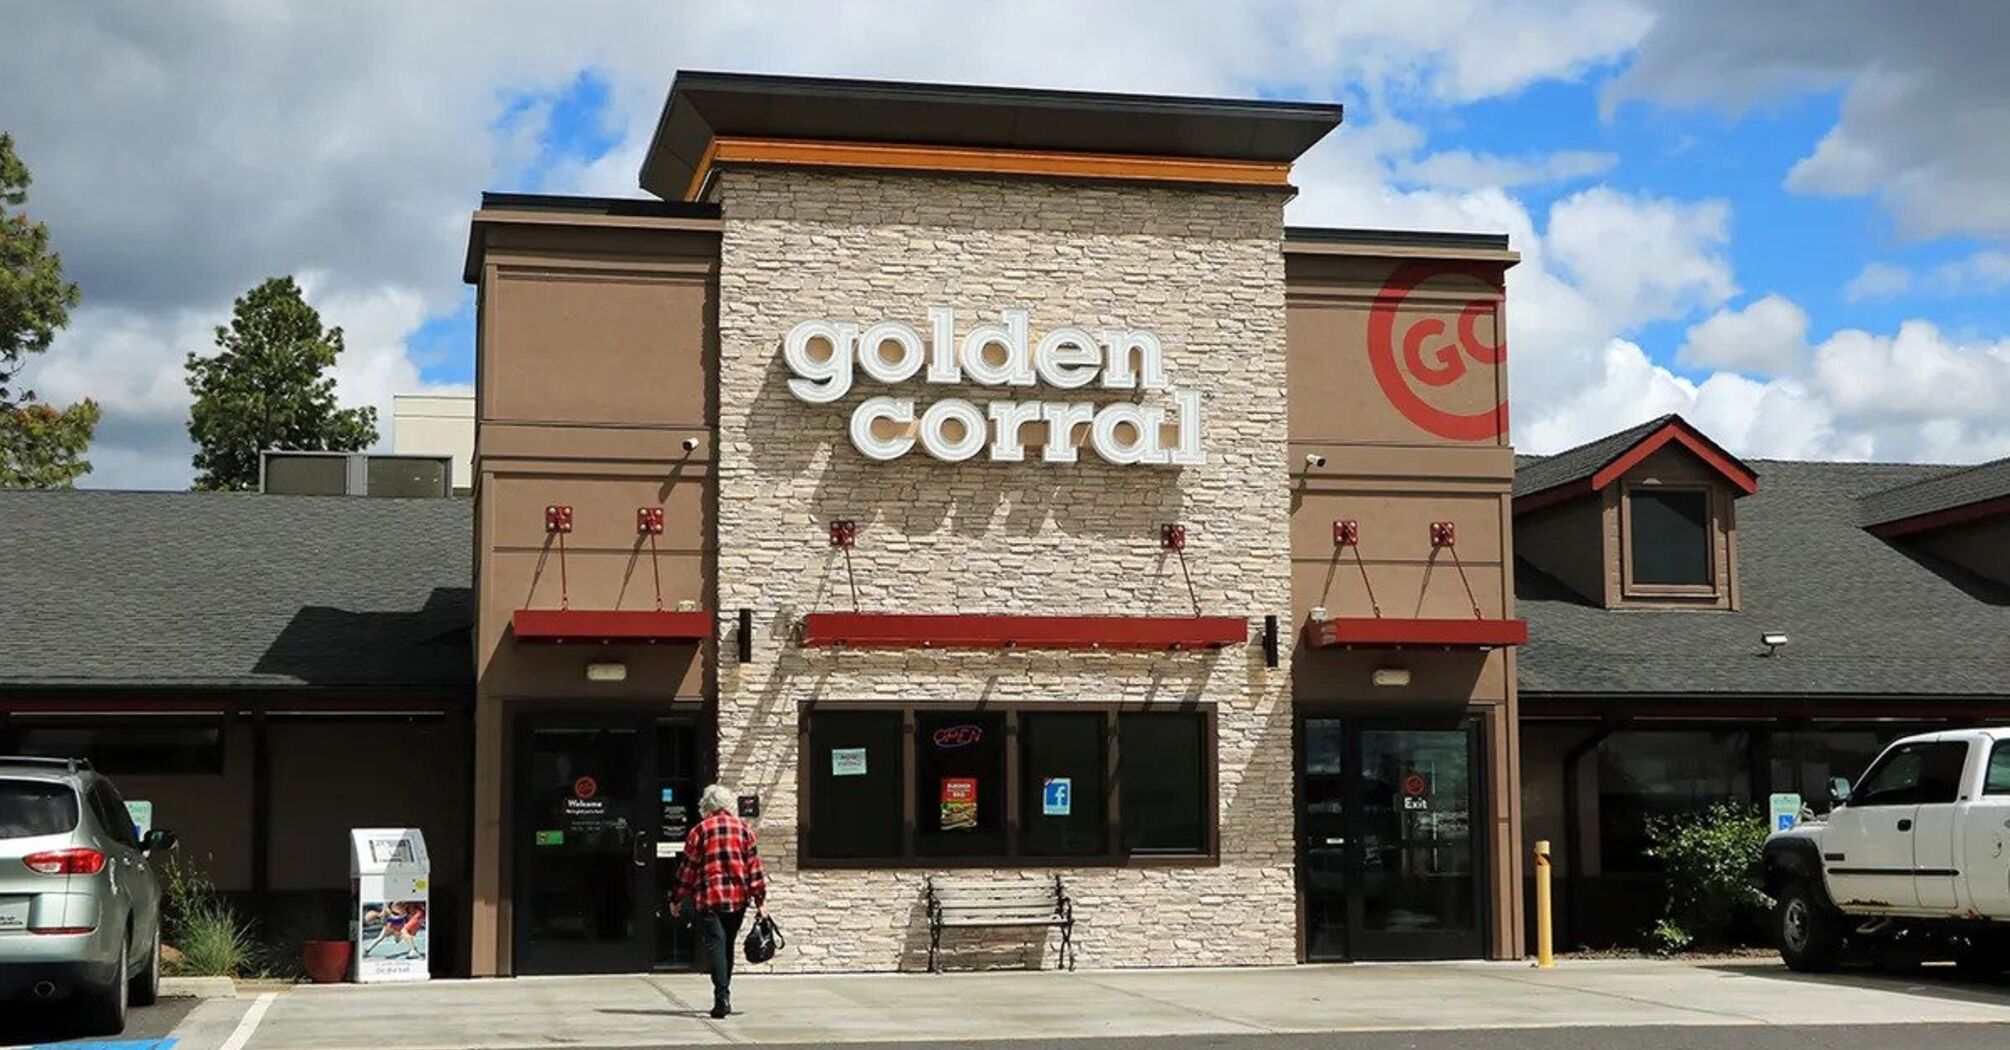 Woman unexpectedly gives birth at Golden Corral in Arkansas, names baby after restaurant